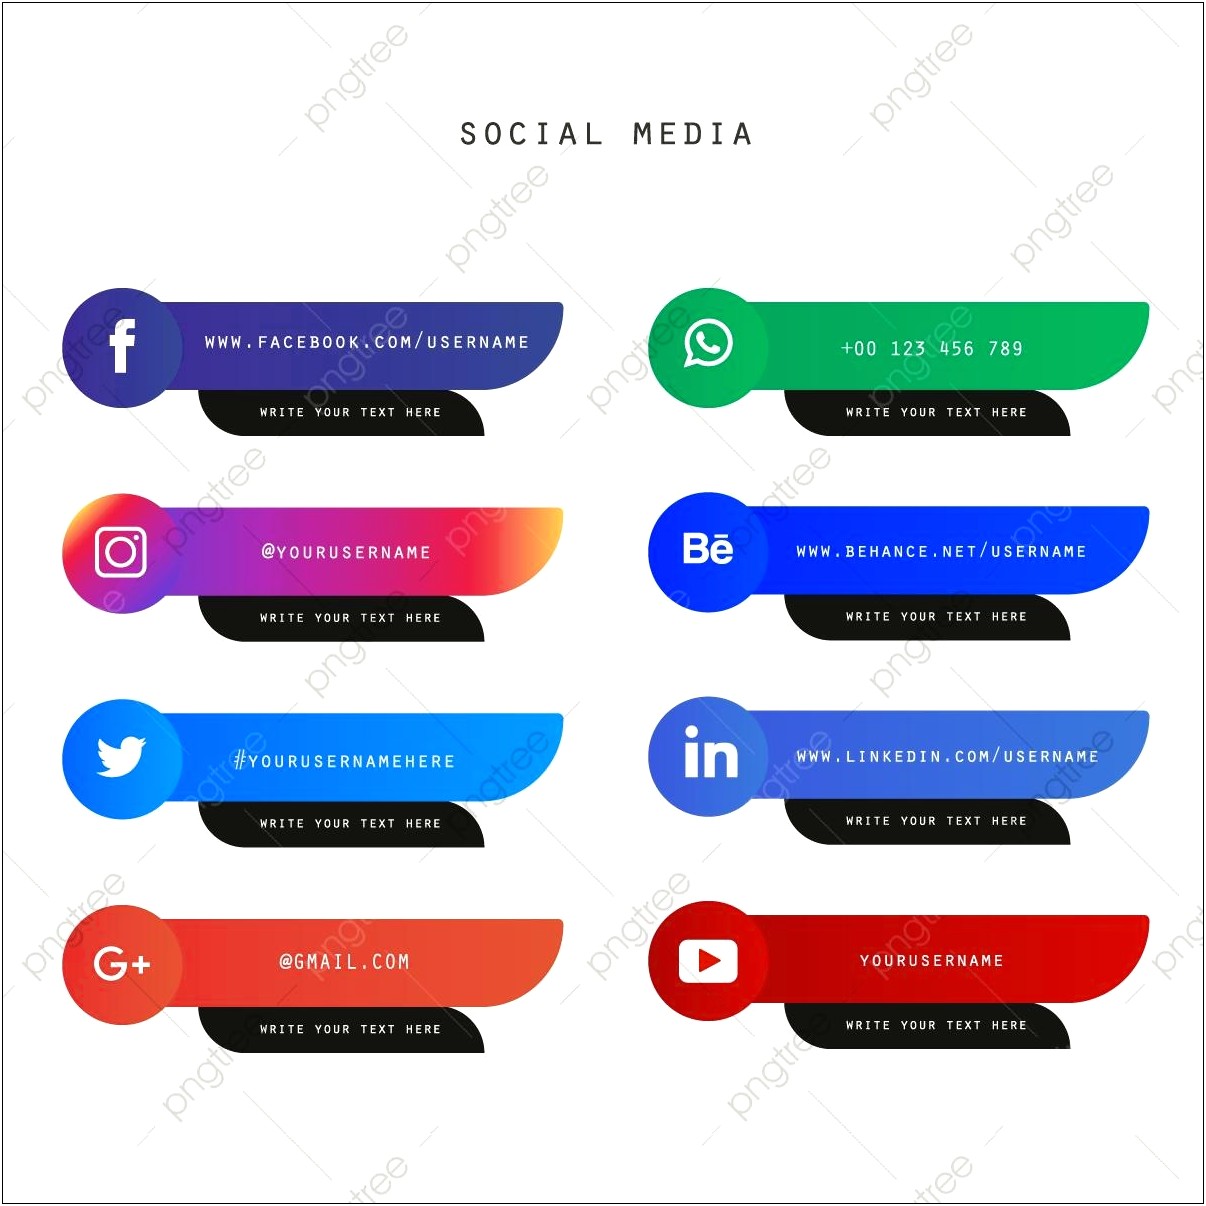 Social Networking Template Like Facebook Free Download